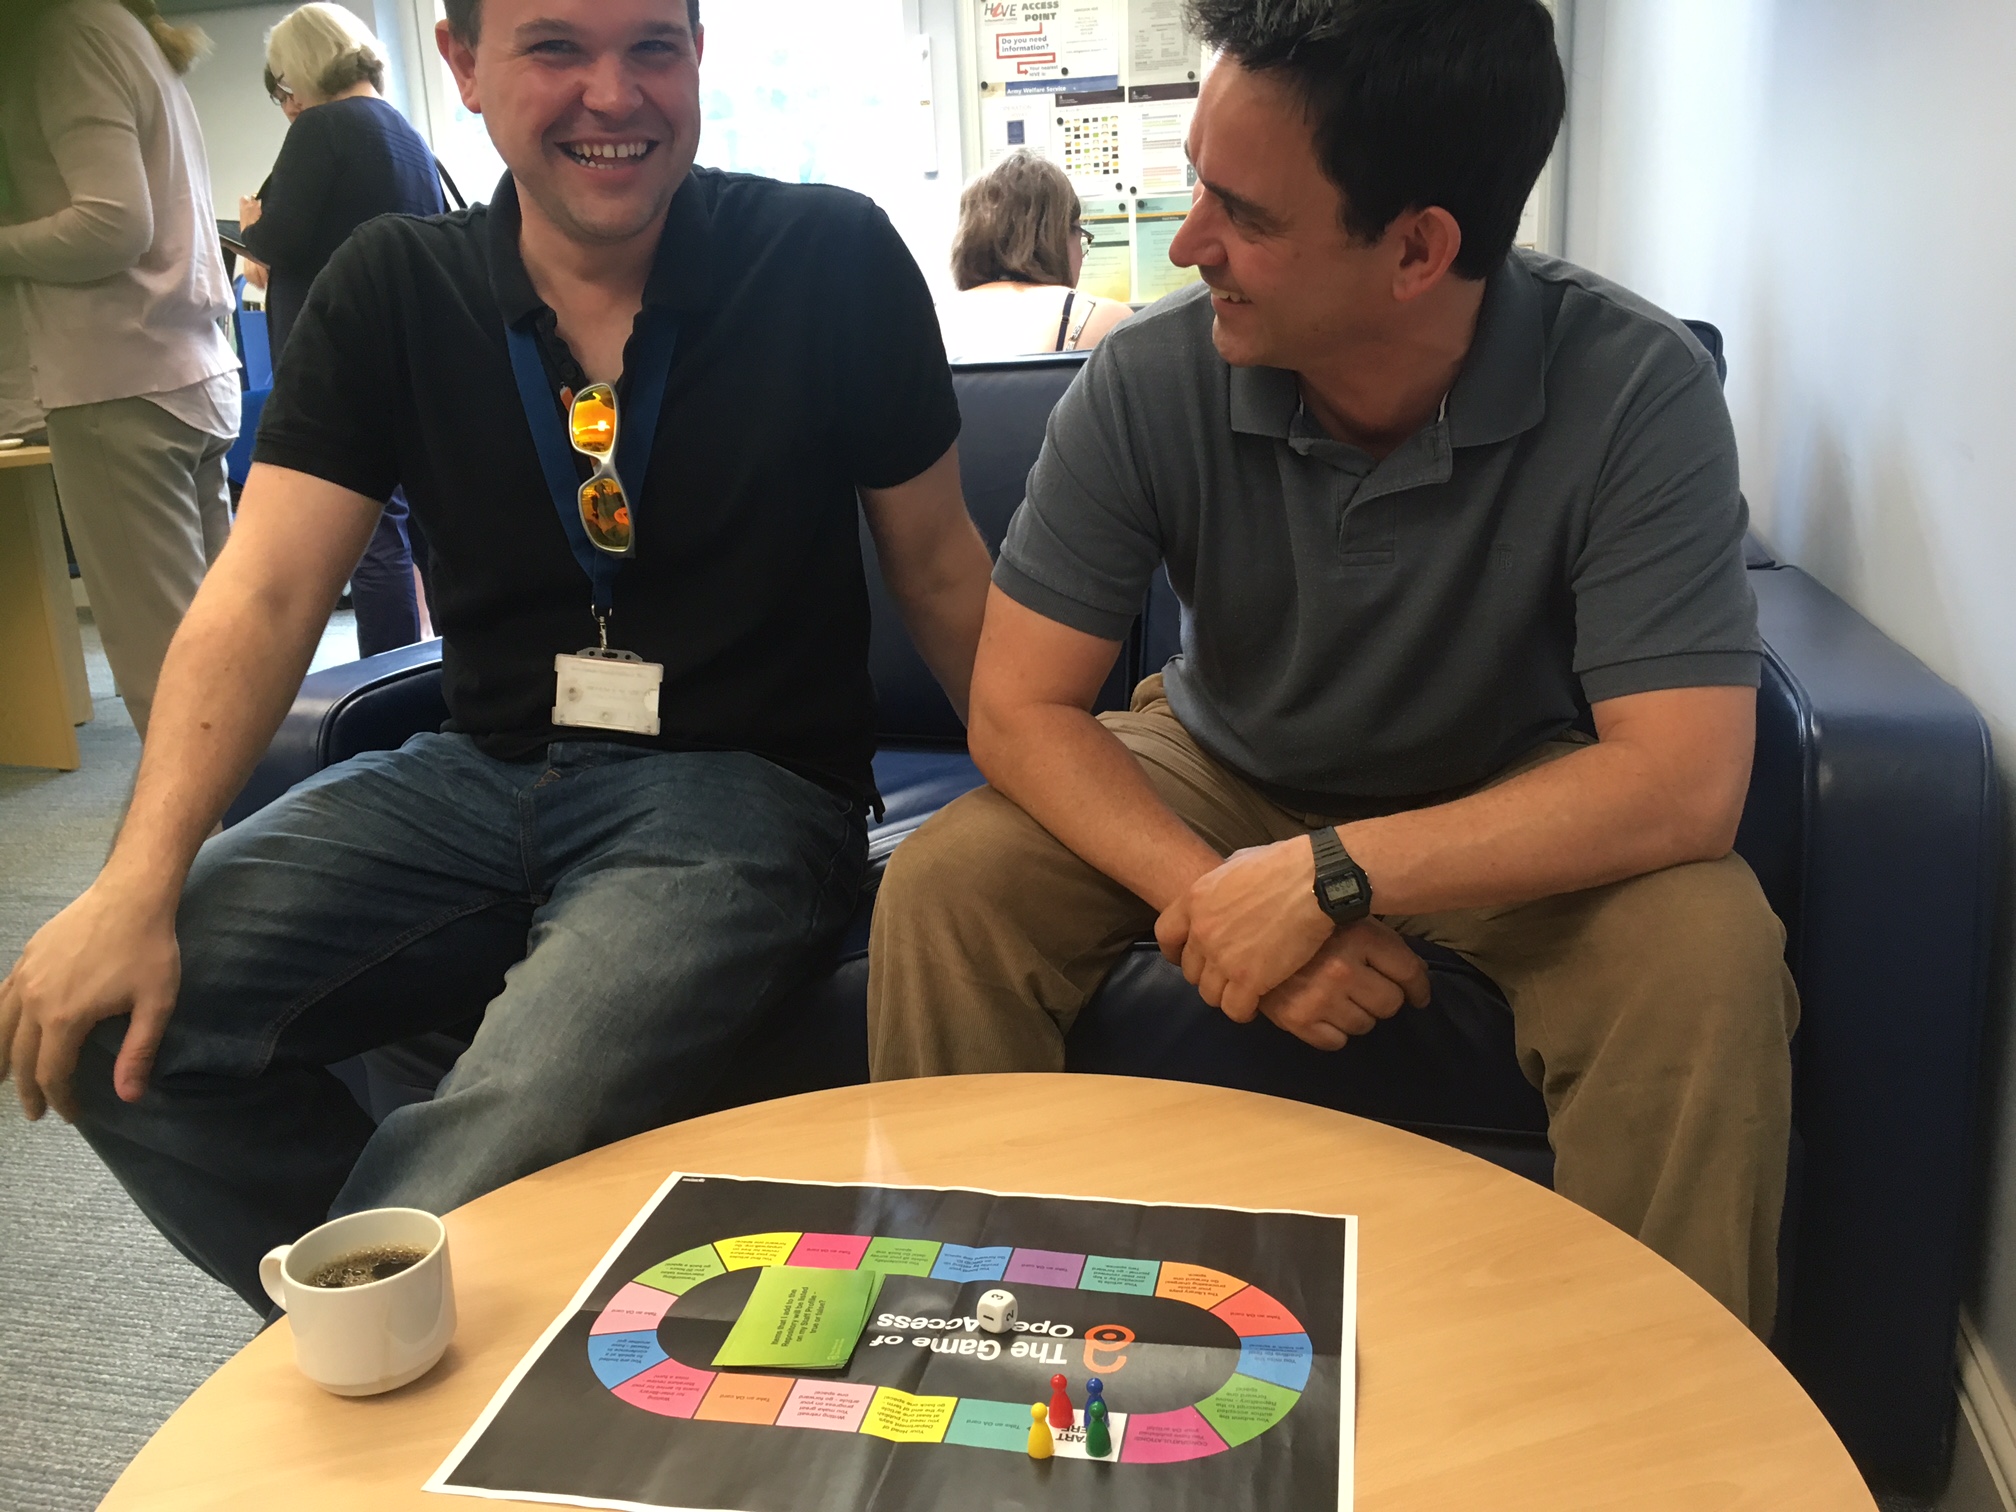 Researchers playing the Game of Open Access at our coffee morning